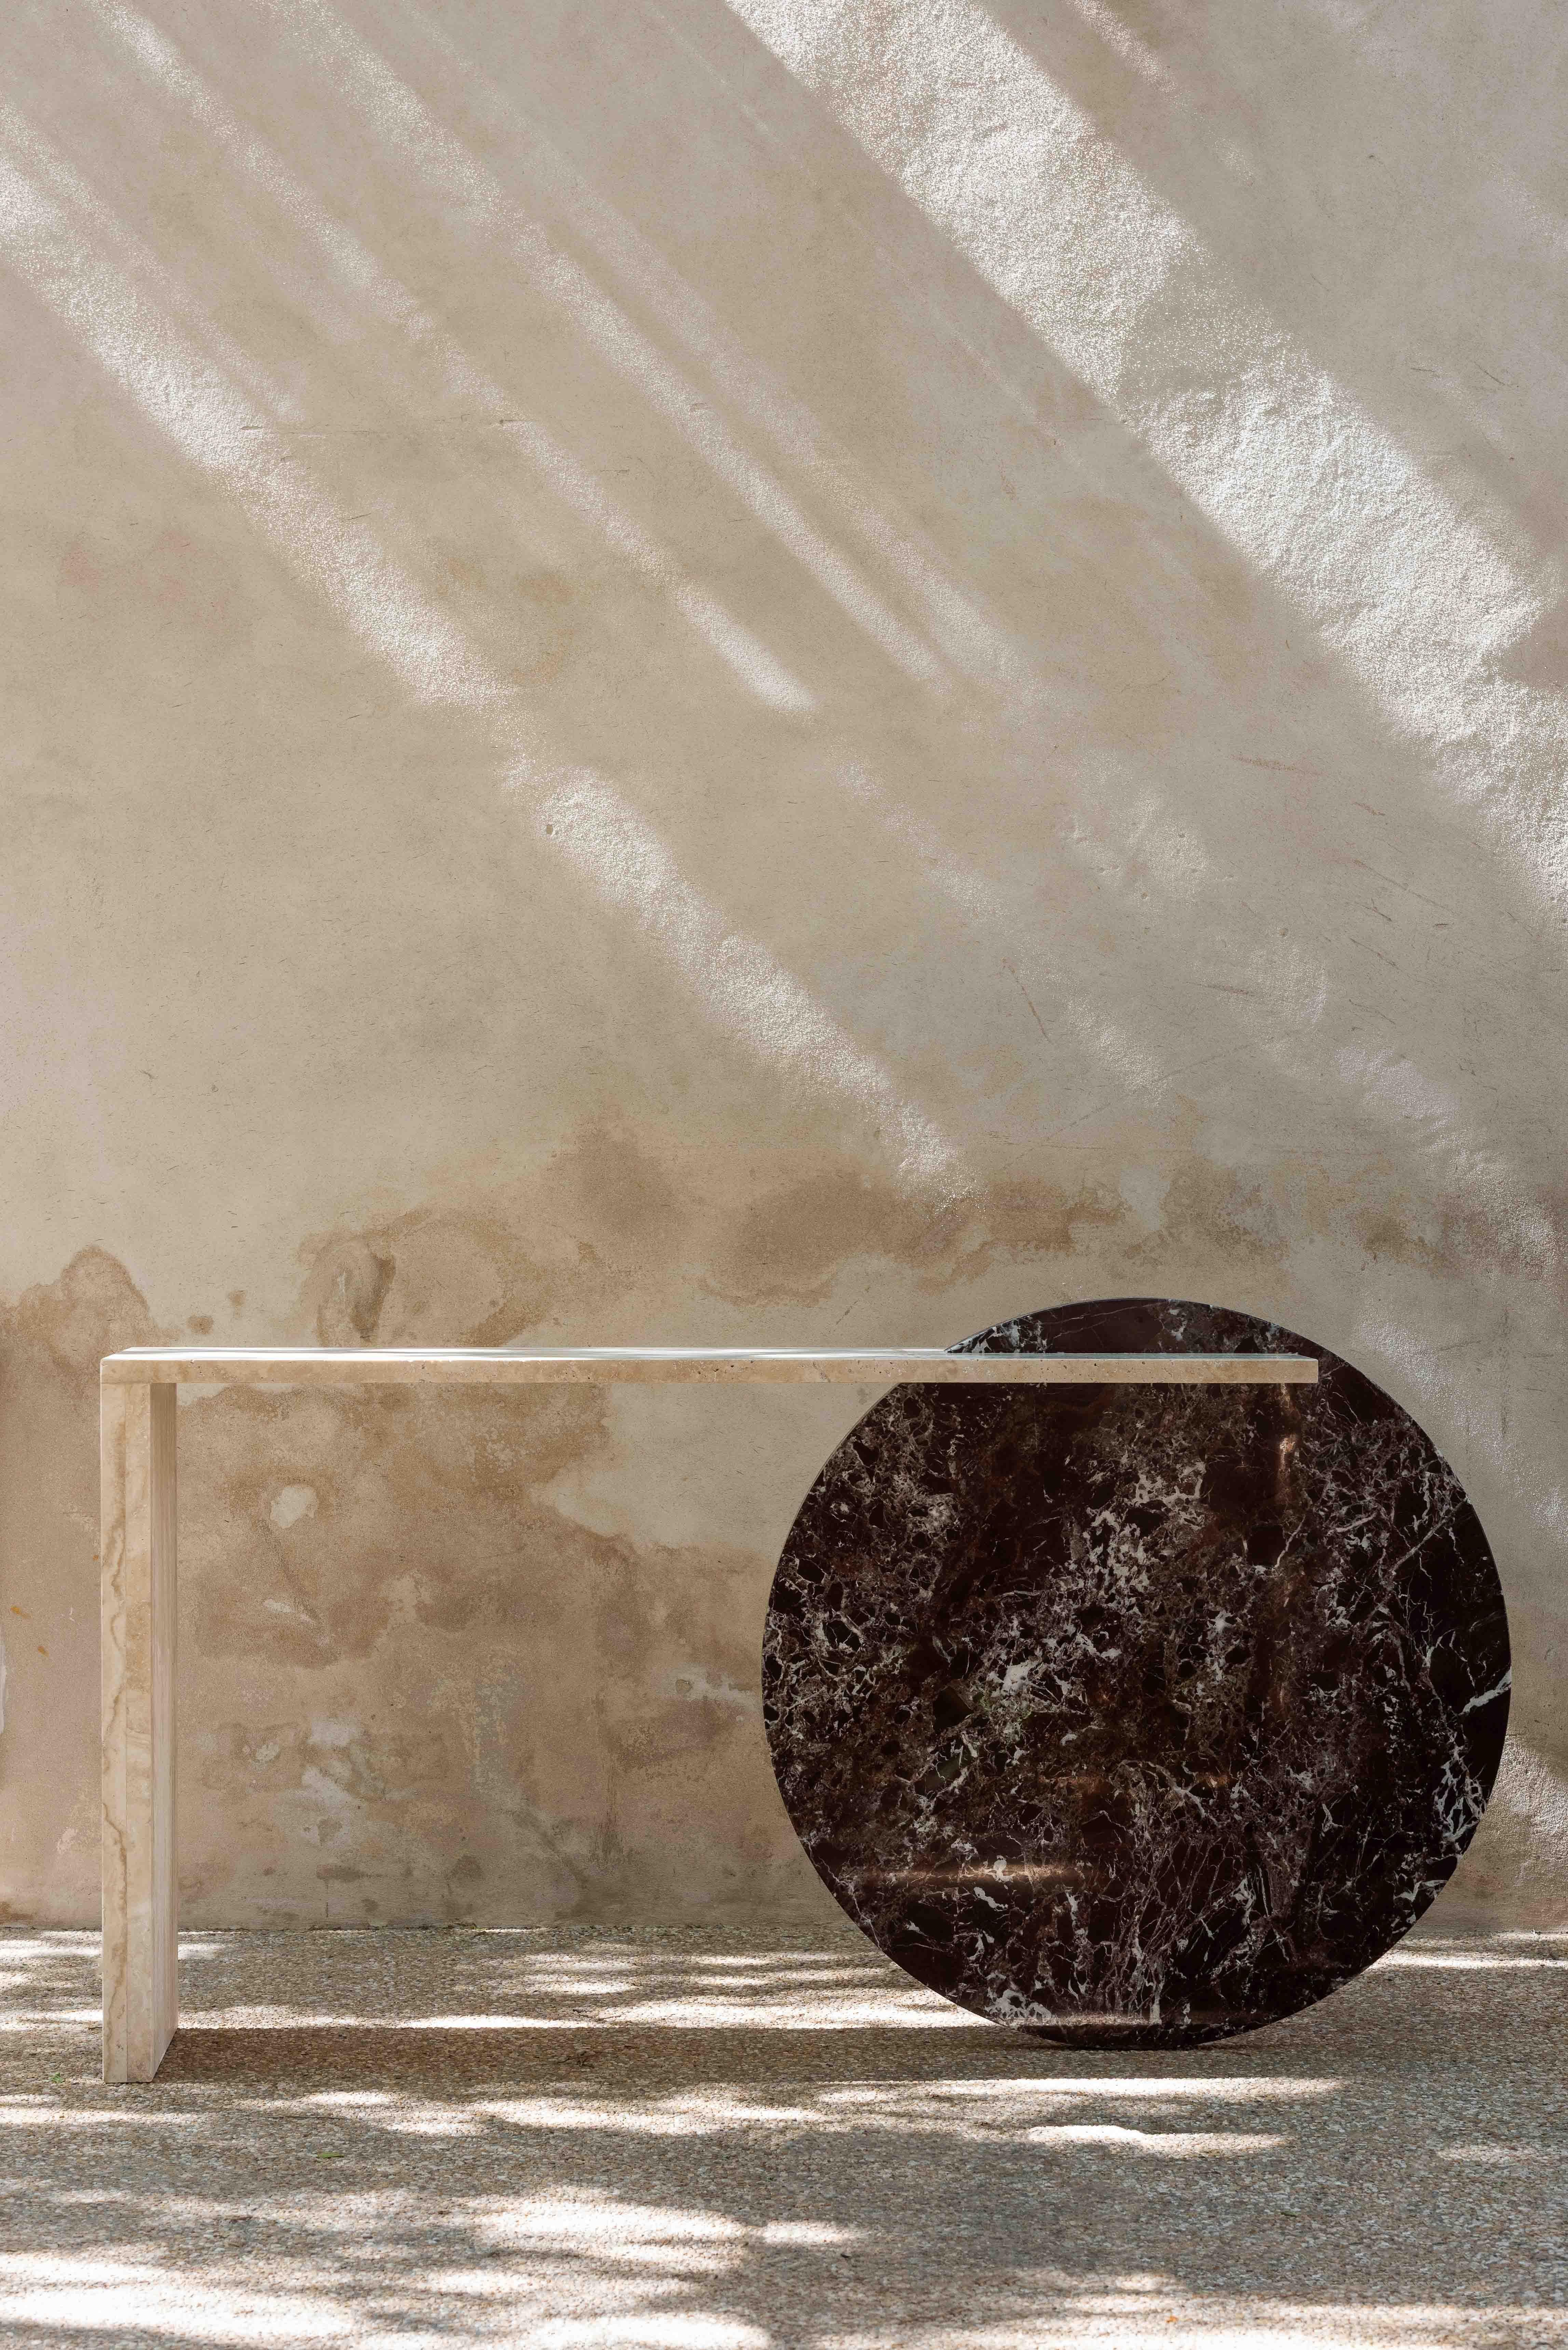 When it comes to our midcentury console table, the effortless composition, contemporary architecture and eccentric design bring forth the golestan series. Evoking rich emotions of heritage and culture with each celestial piece of marble and its